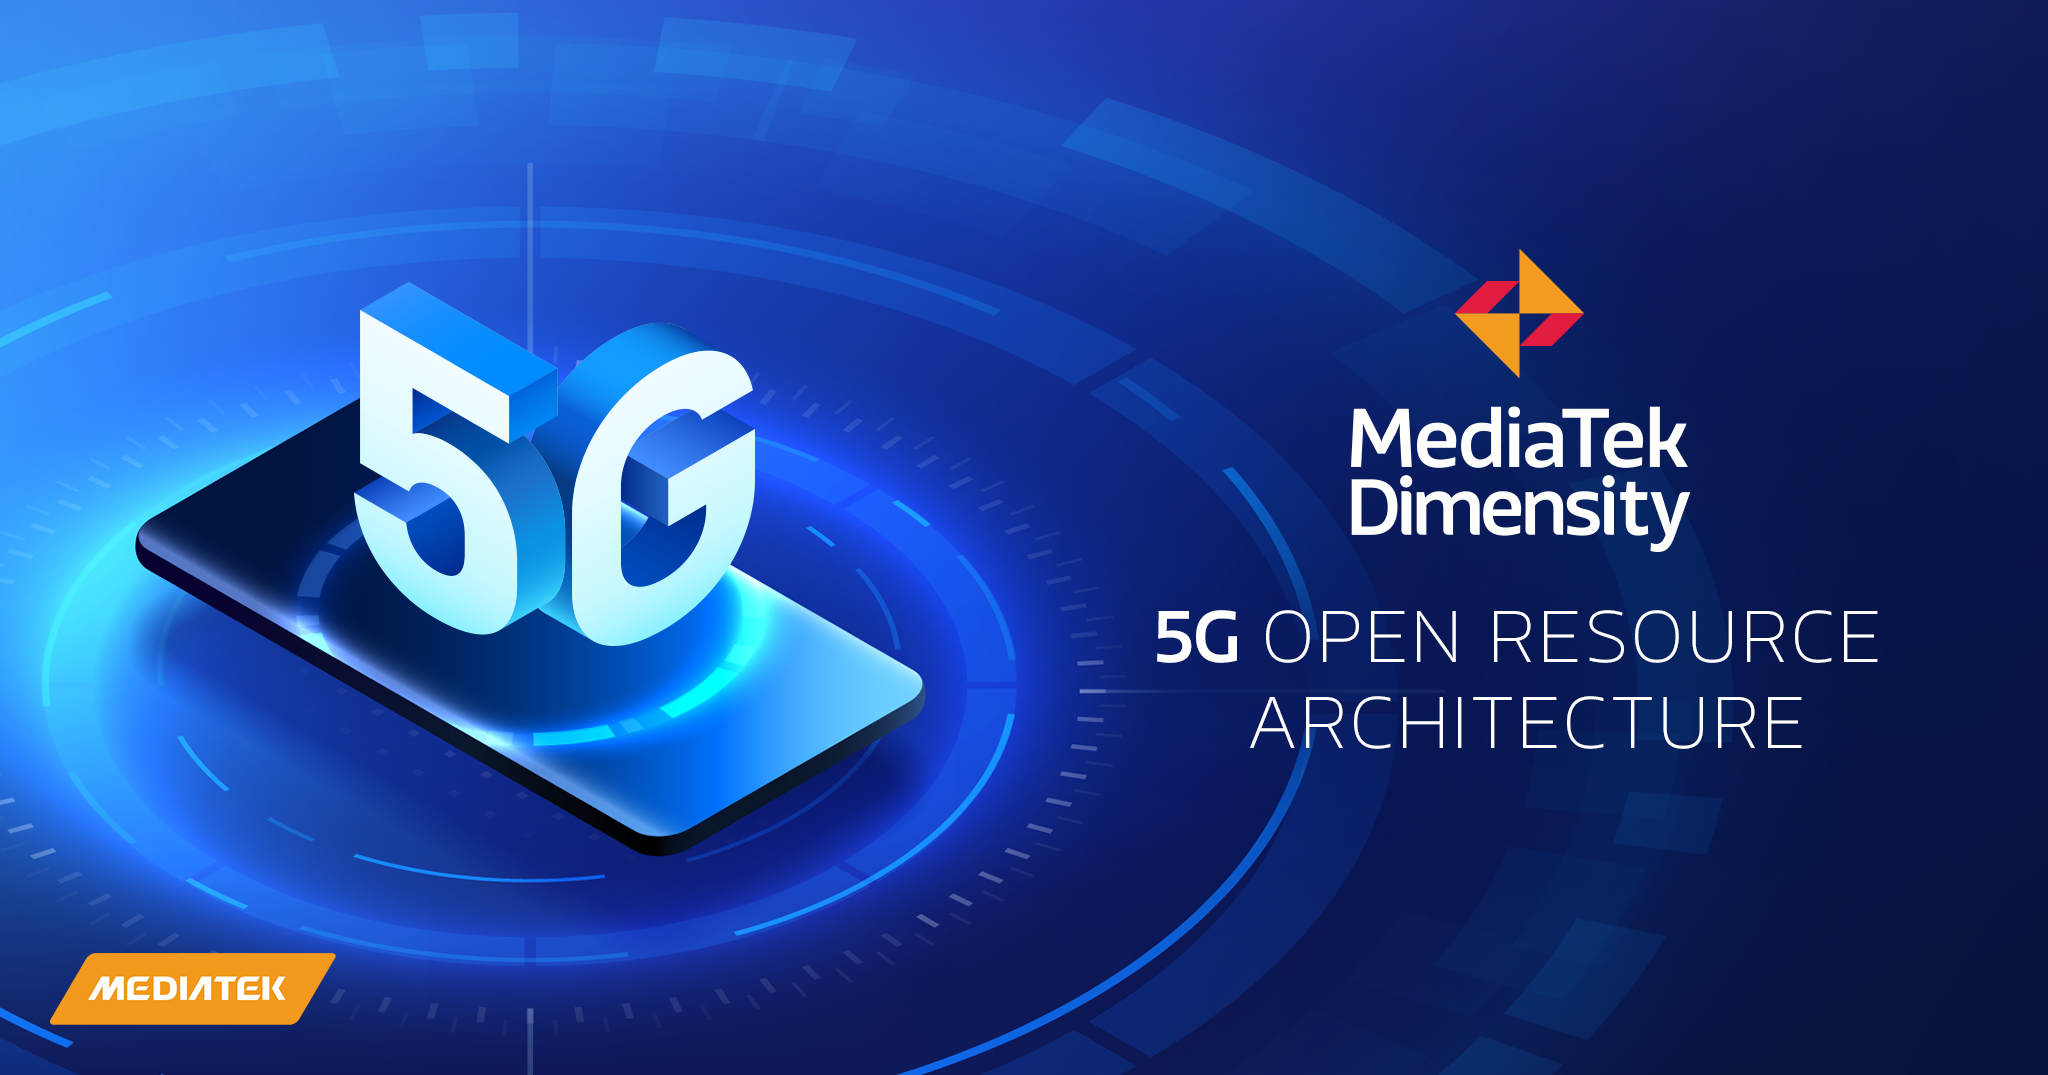 MediaTek Launches Dimensity 5G Open Resource Architecture Giving Device Makers Access to More Customized Consumer Experiences